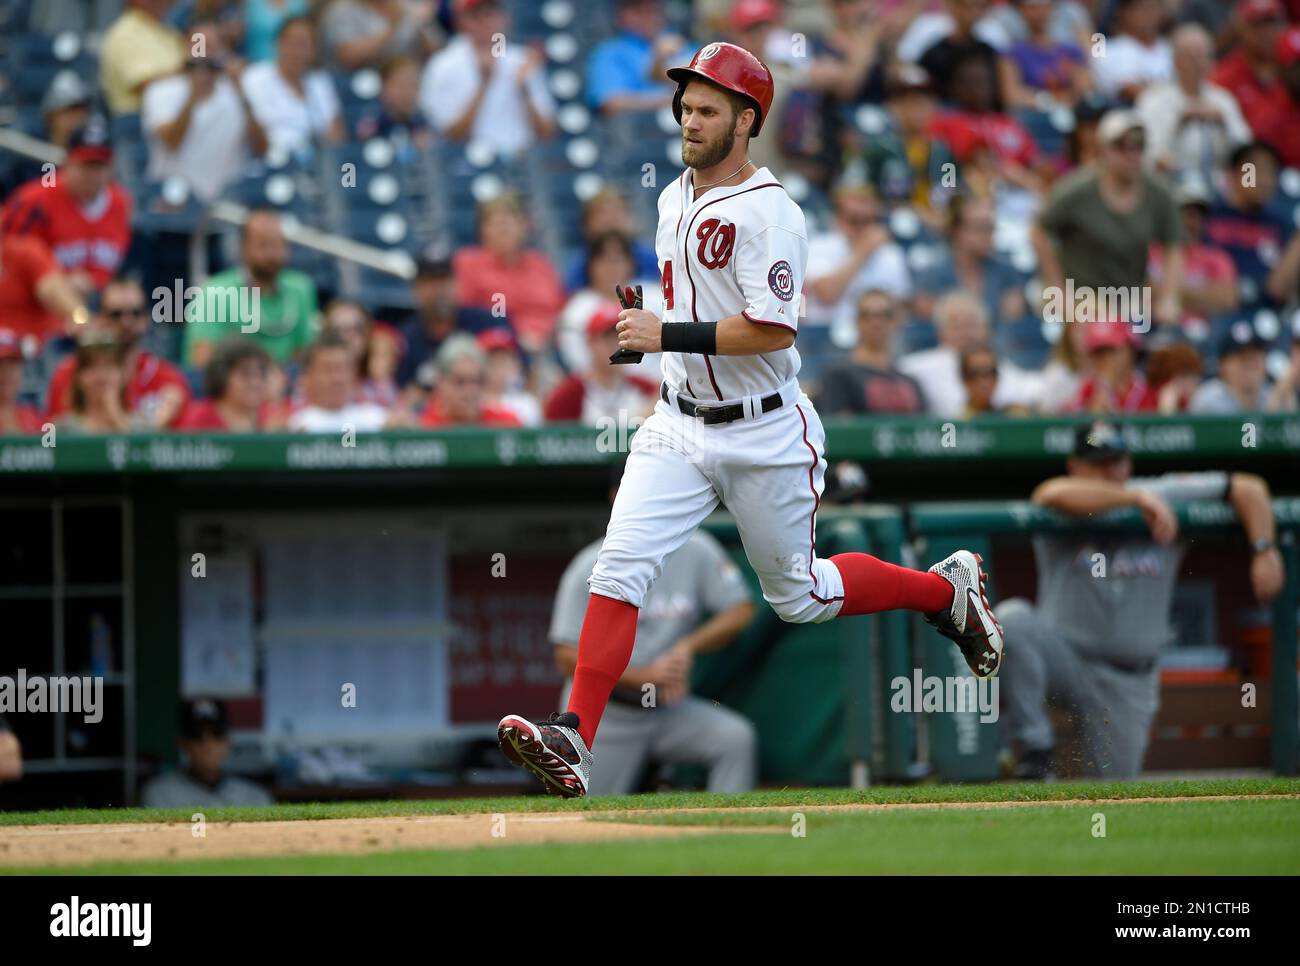 From Arkansas to Nats Park: The story of Bryce Harper's Home Run